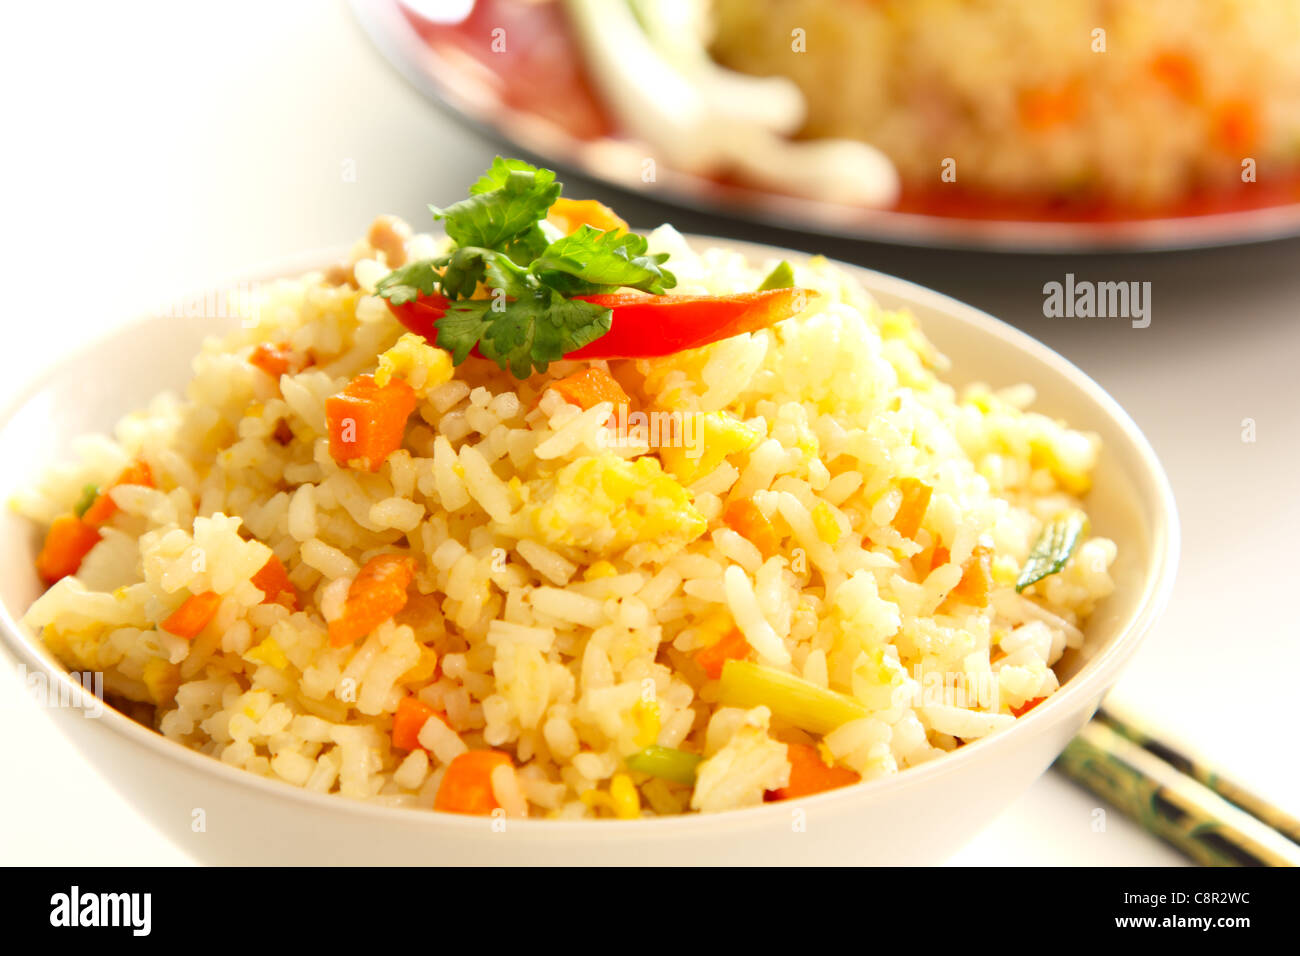 Fried rice with vegetable ,egg and pork Stock Photo